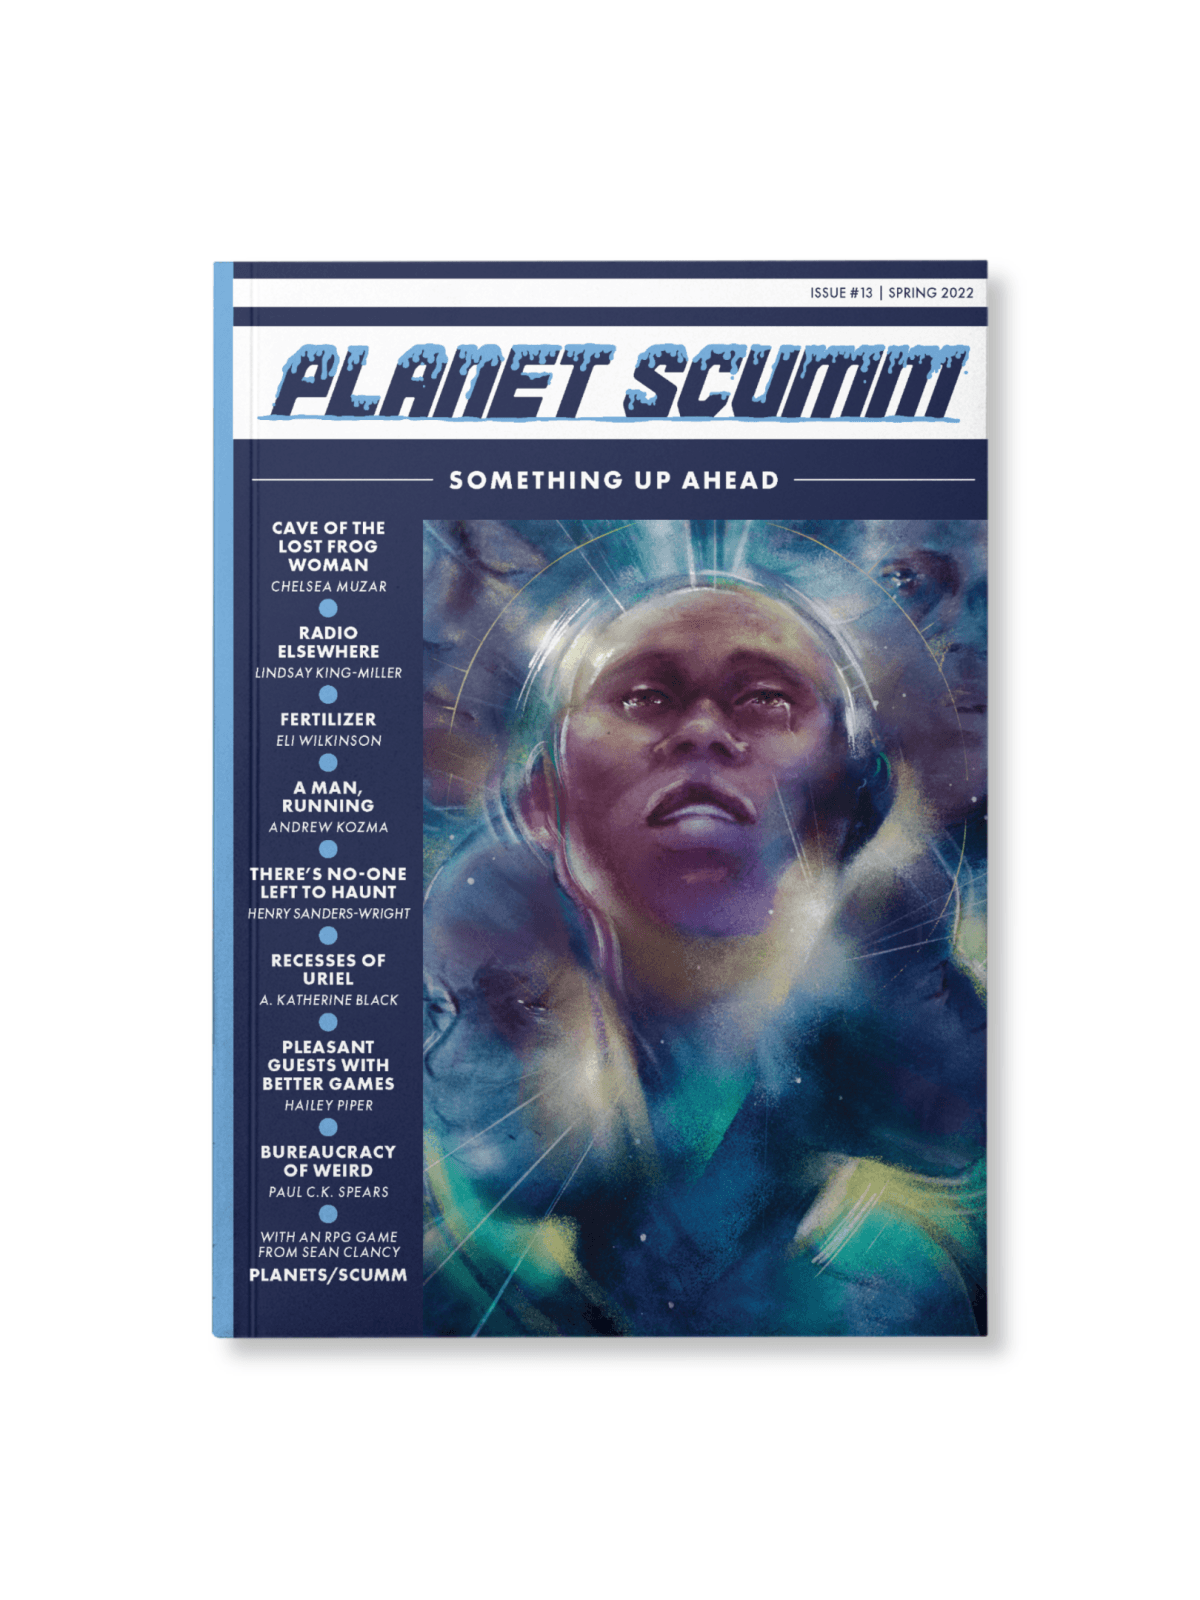 Planet Scumm #13: Something Up Ahead (Spring 2022) - The Fourth Place